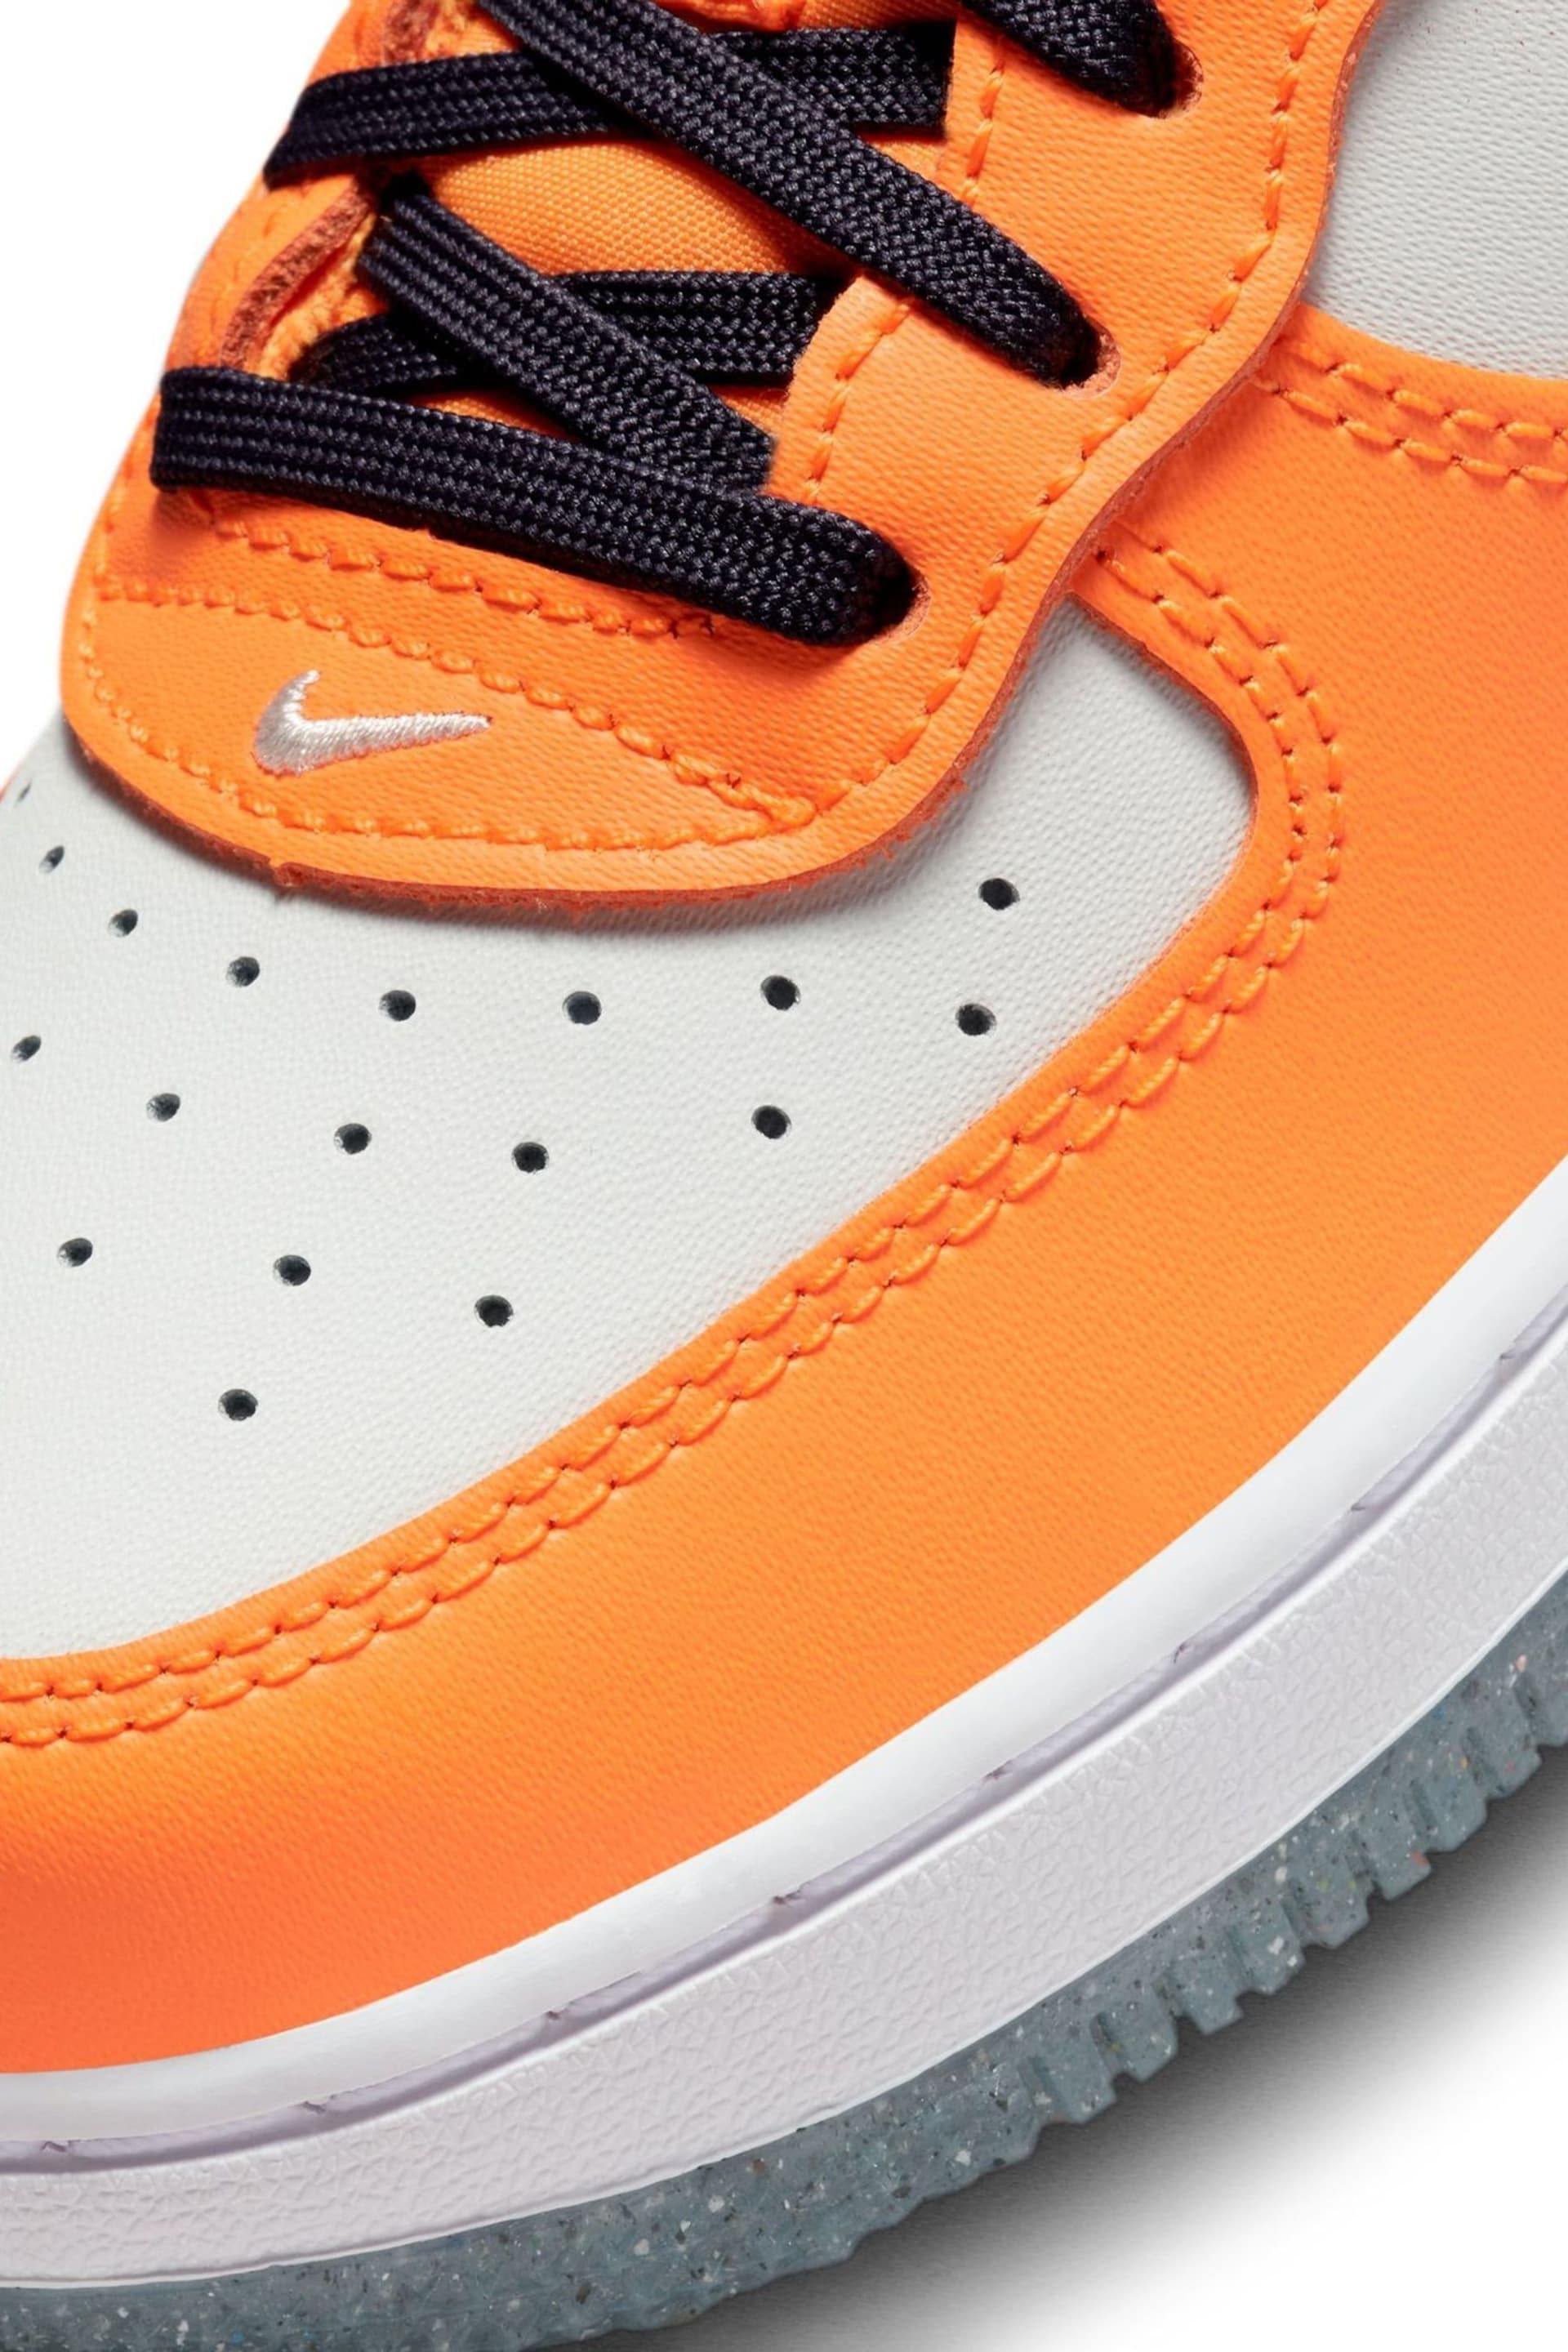 Nike Orange Force 1 Low Junior Trainers - Image 9 of 11